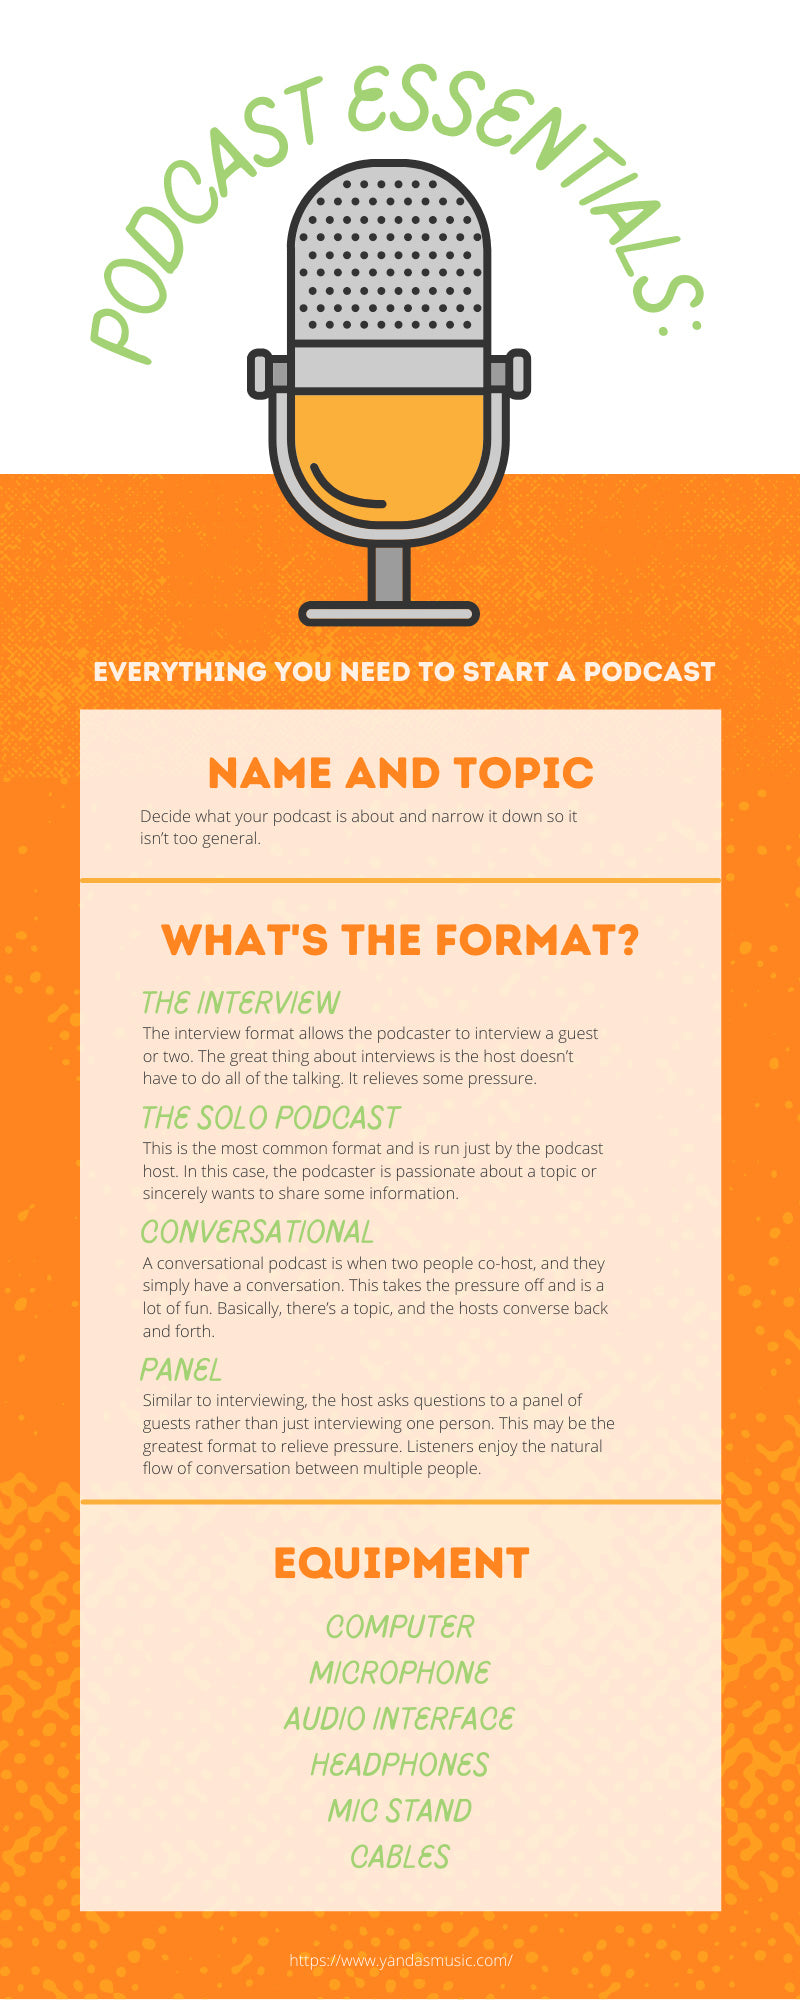 Podcast Essentials: Everything You Need To Start a Podcast